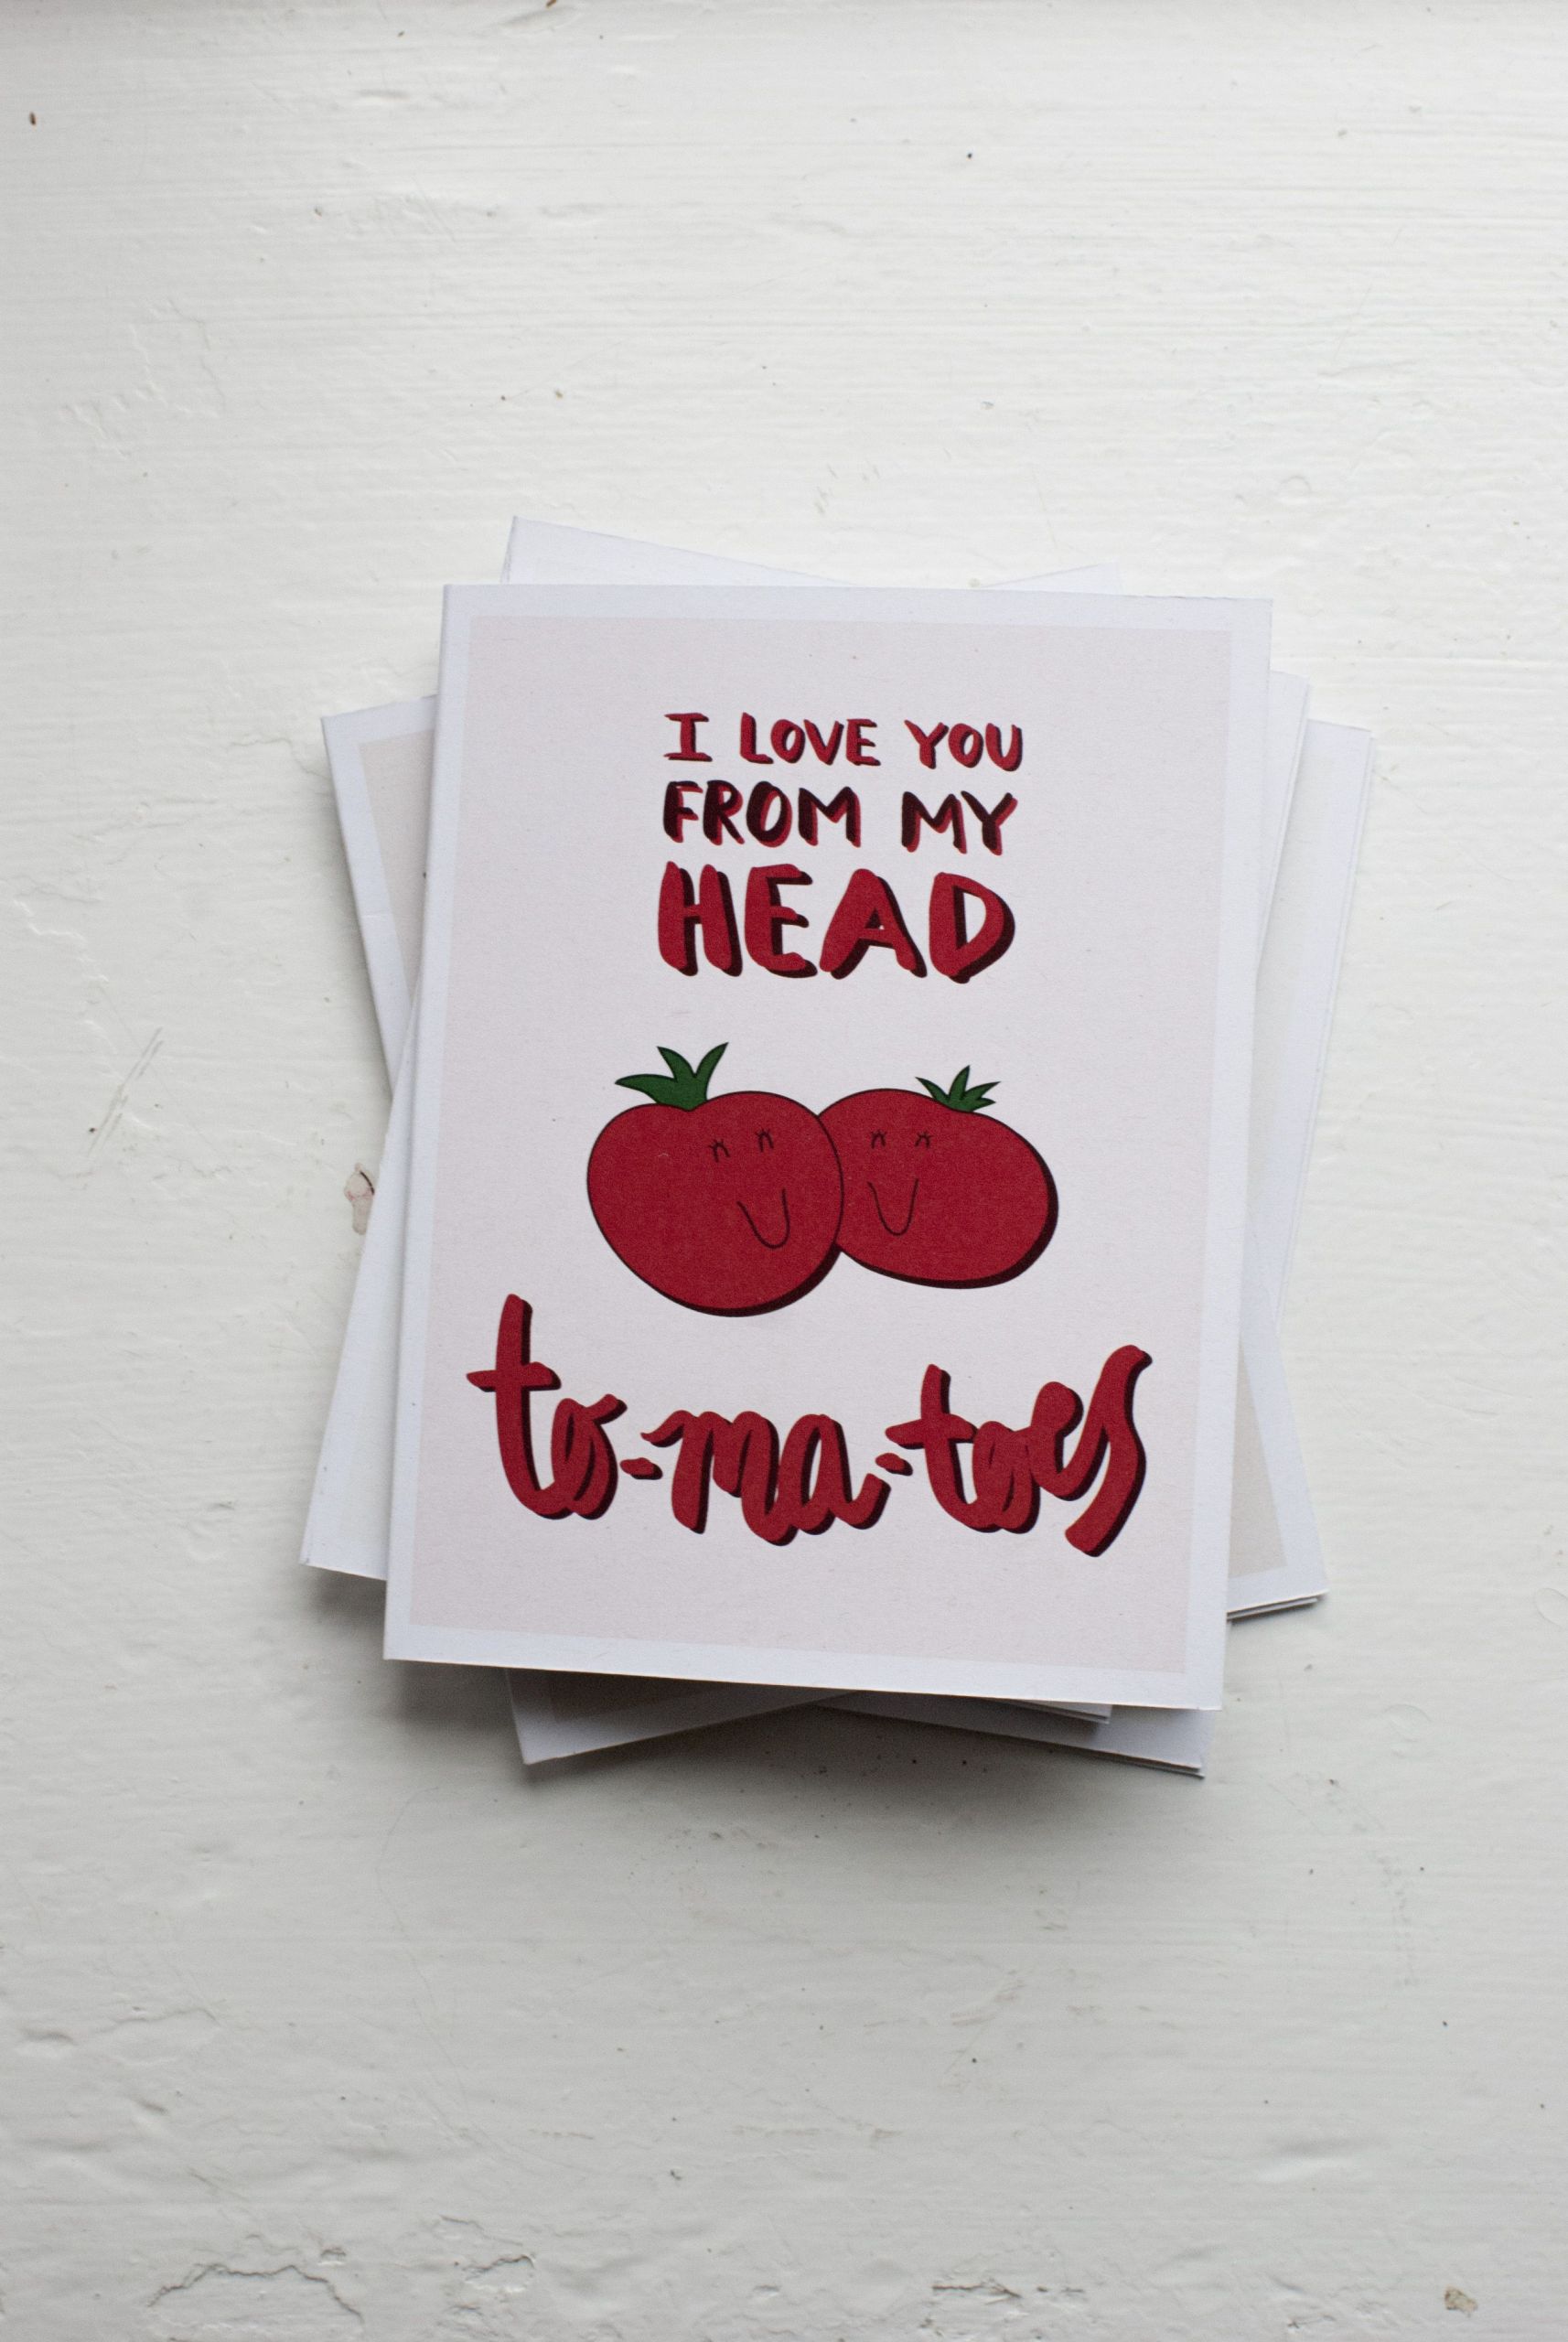 Valentines Day Ideas For Mom
 "I love you from my head to ma toes" punny Valentine s Day